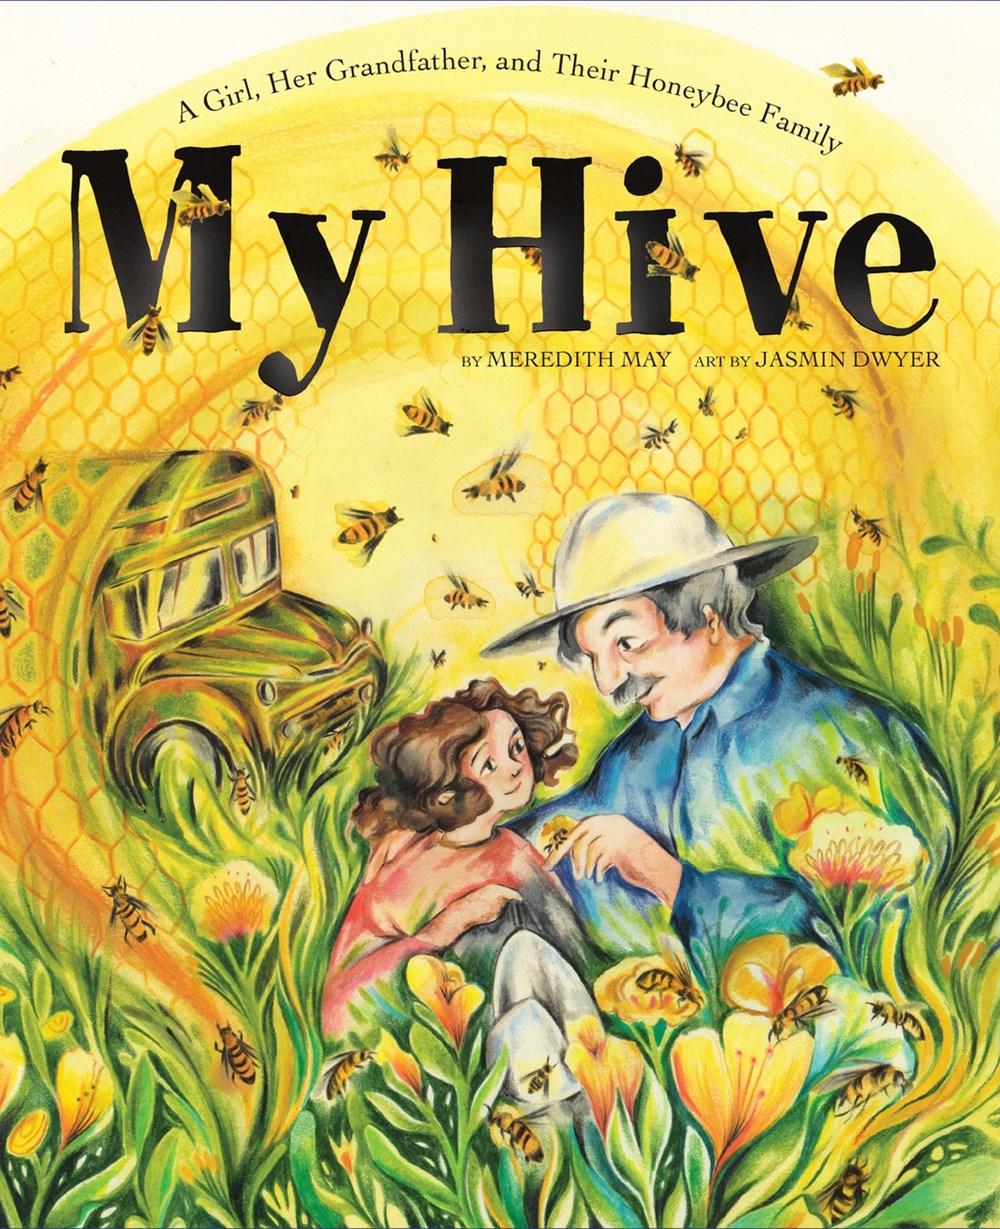 My Hive: A Girl, Her Grandfather, and Their Honeybee Family